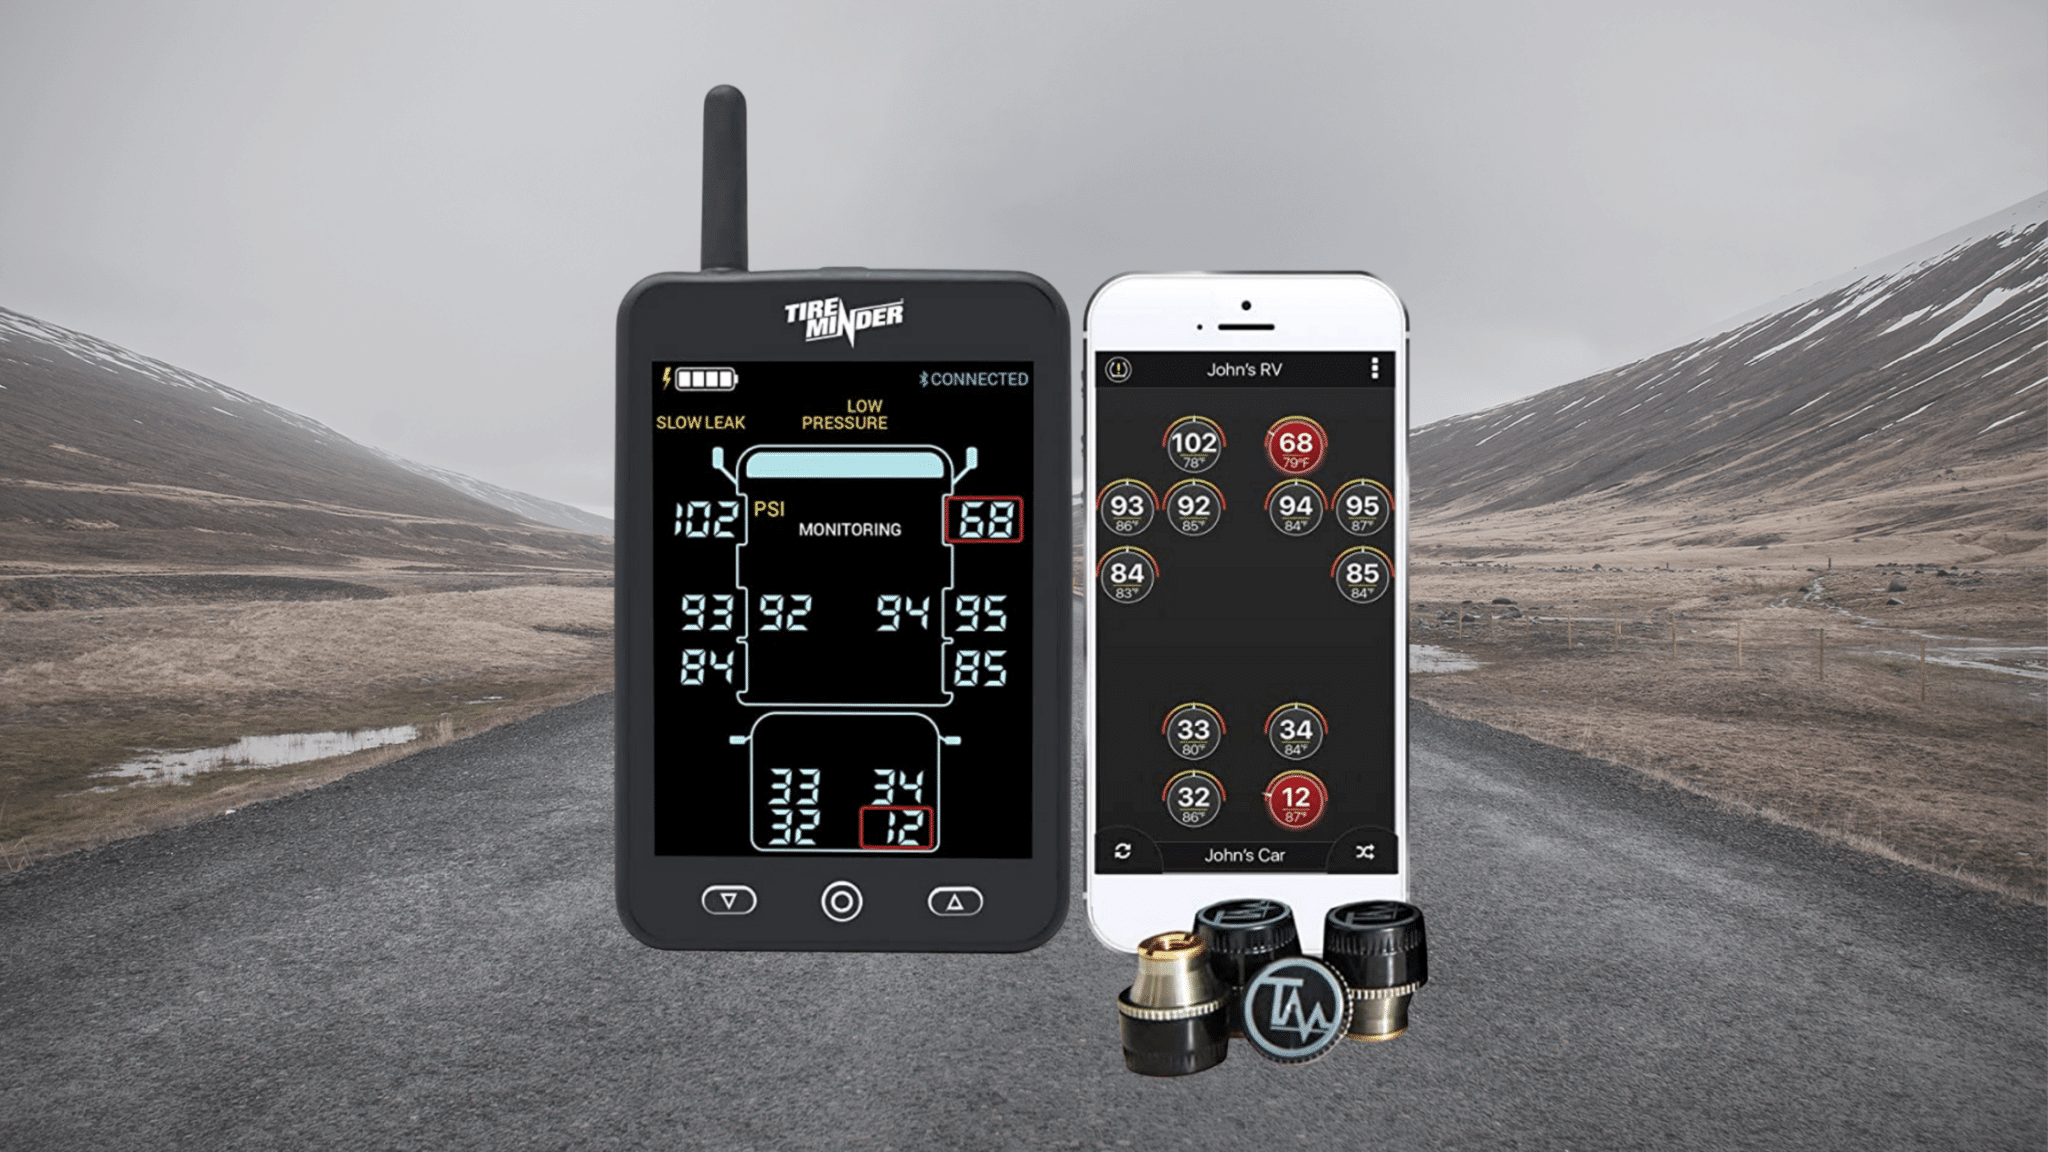 The Best Quality RV TPMS (Tire Pressure Monitoring System)